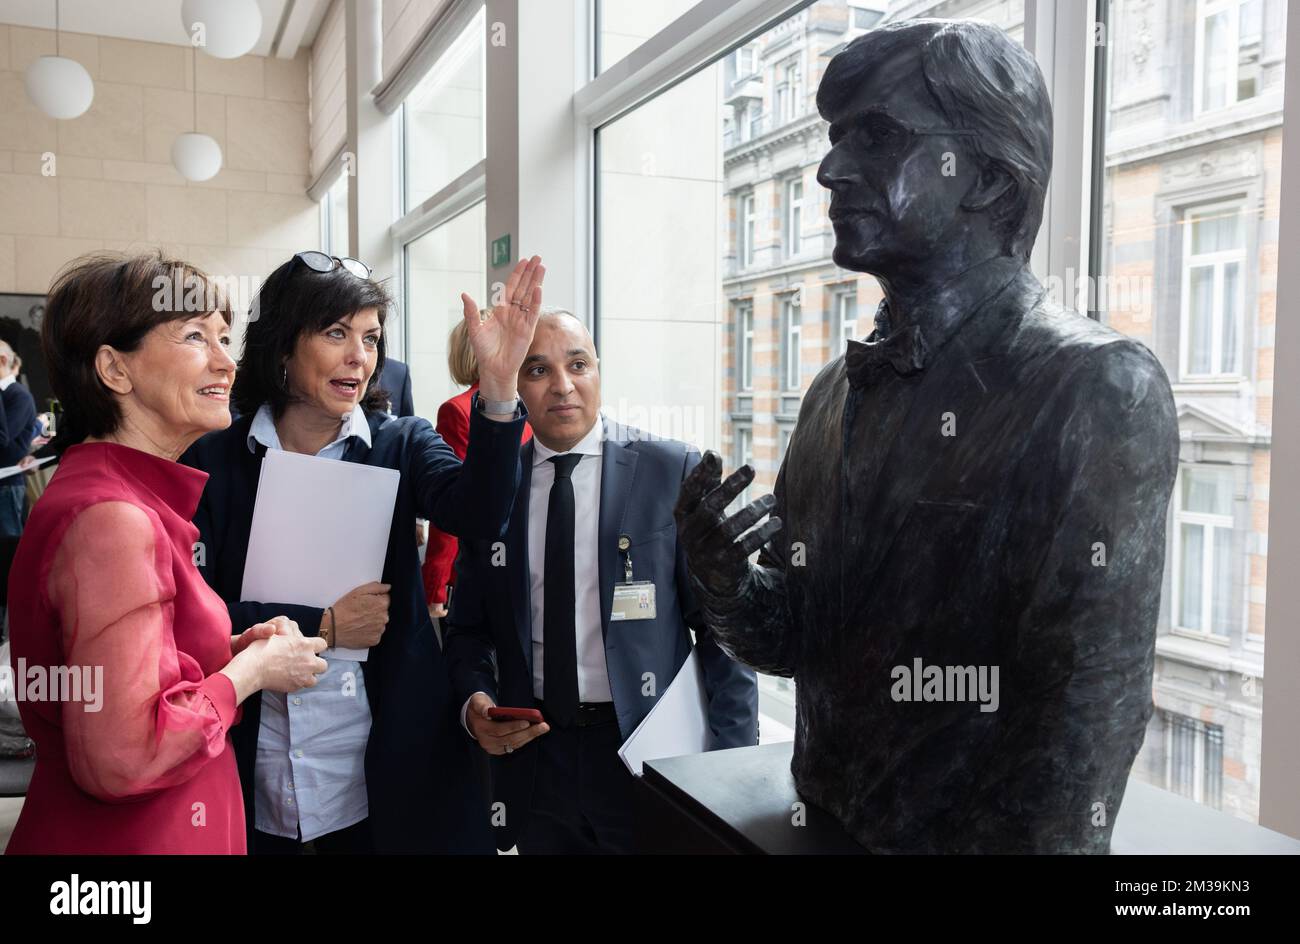 PS' Laurette Onkelinx, Joelle Milquet and PS' Ridouane Chahid pictured during the inauguration of a sculpture of Walloon Minister President Elio Di Rupo, Friday 22 April 2022 at the Chamber at the Federal Parliament in Brussels. BELGA PHOTO BENOIT DOPPAGNE Stock Photo